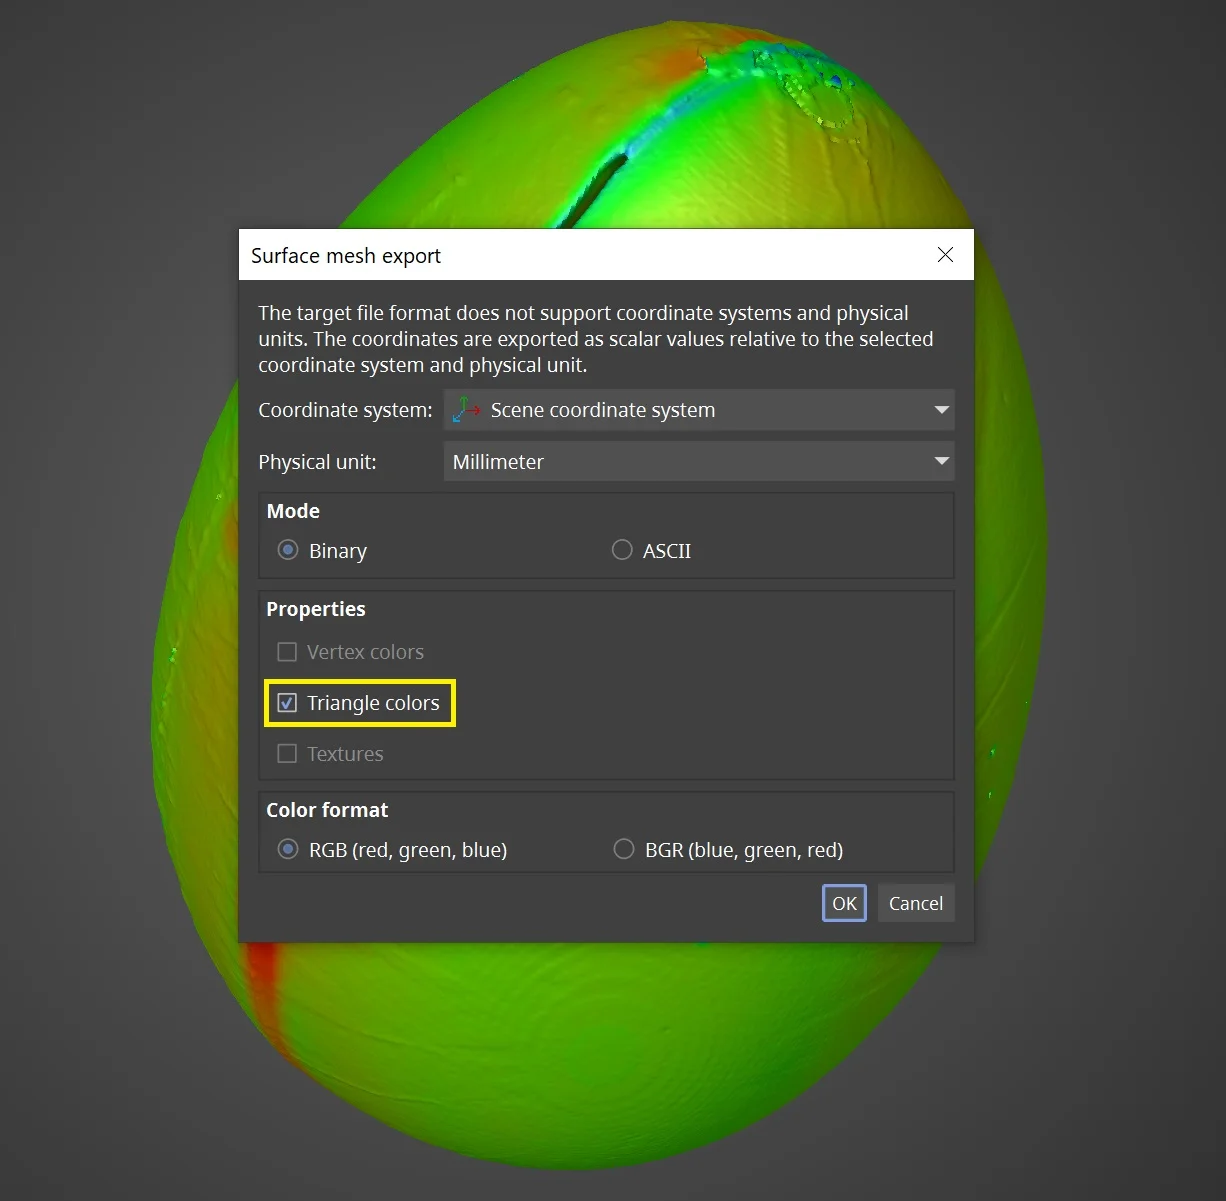 Hint to tick "Triangle colors" in the "Surface mesh export dialog"